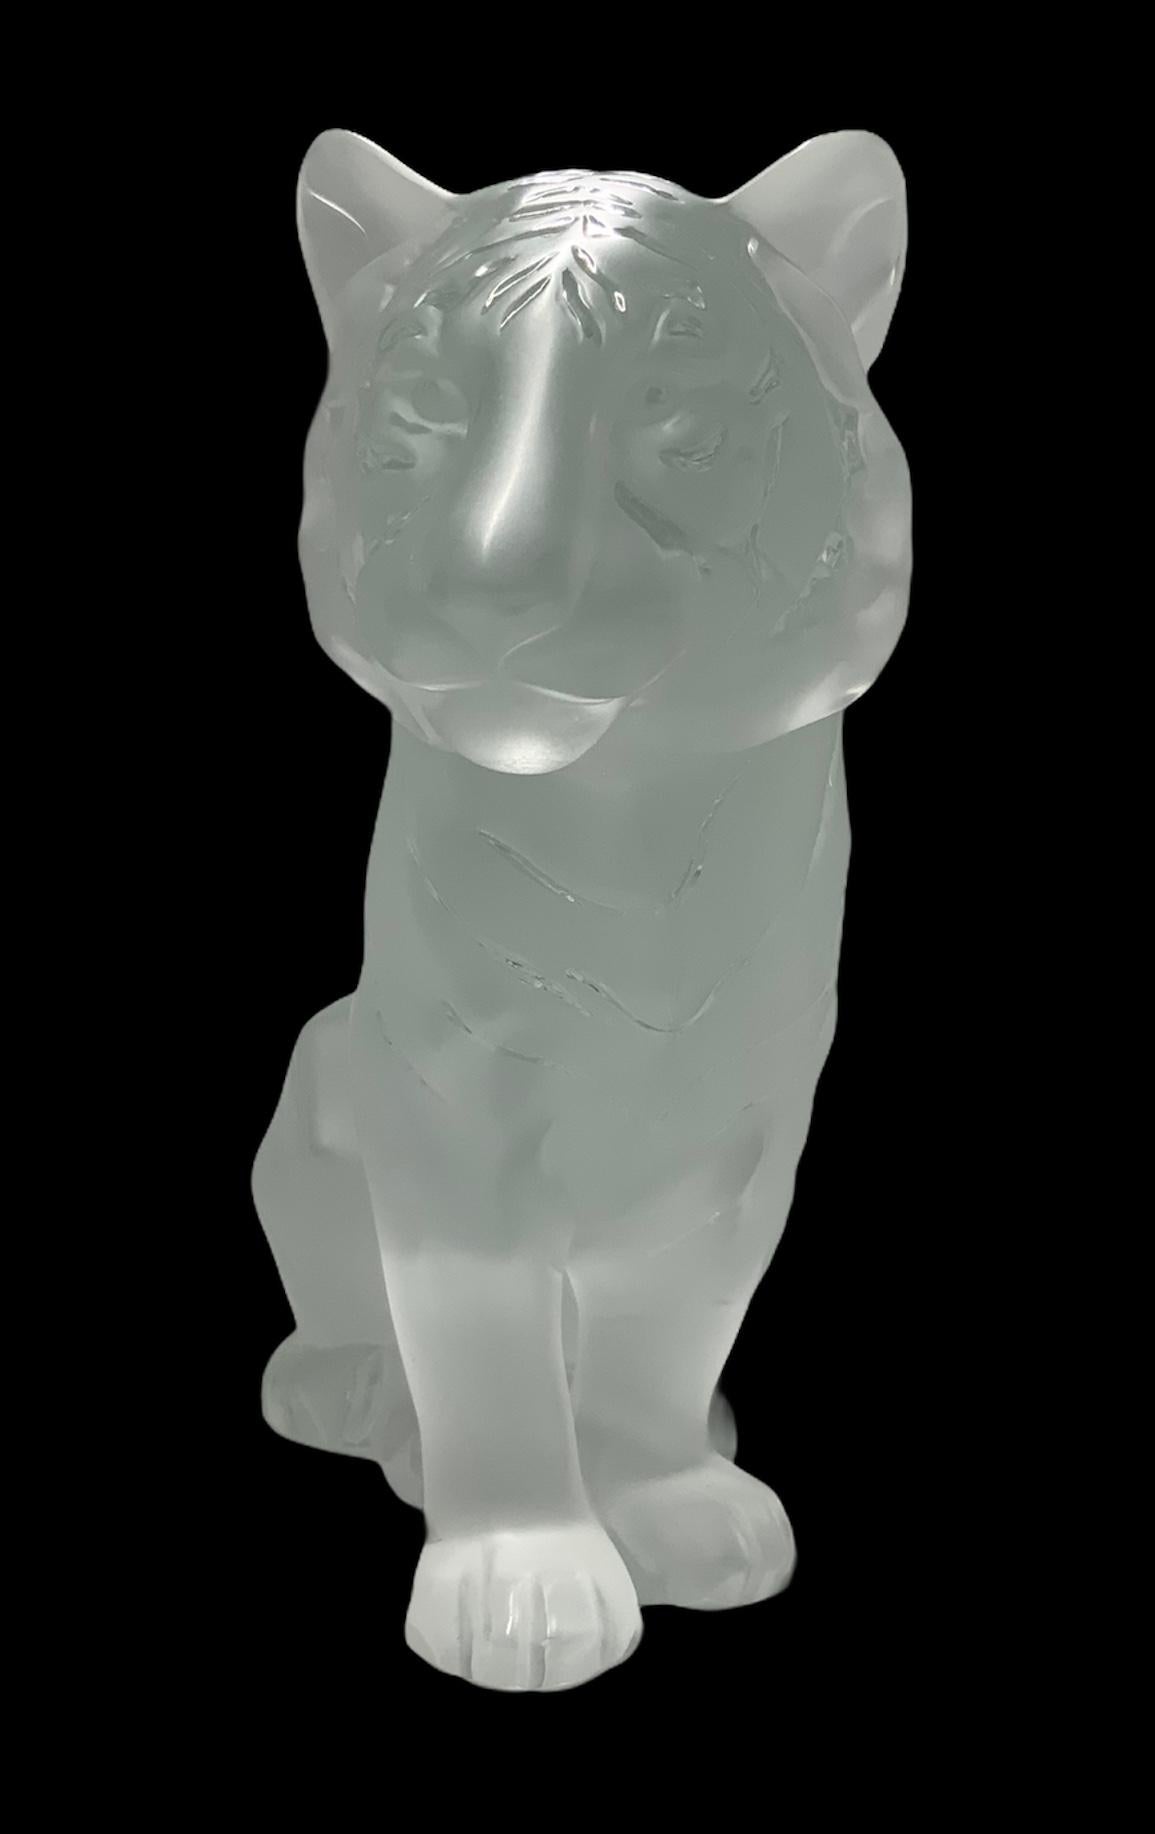 Lalique frosted tiger sculpture showing with its postures and gesture why in Chinese culture it’s considered the king of all beast. It also symbolizes strength and confidence.